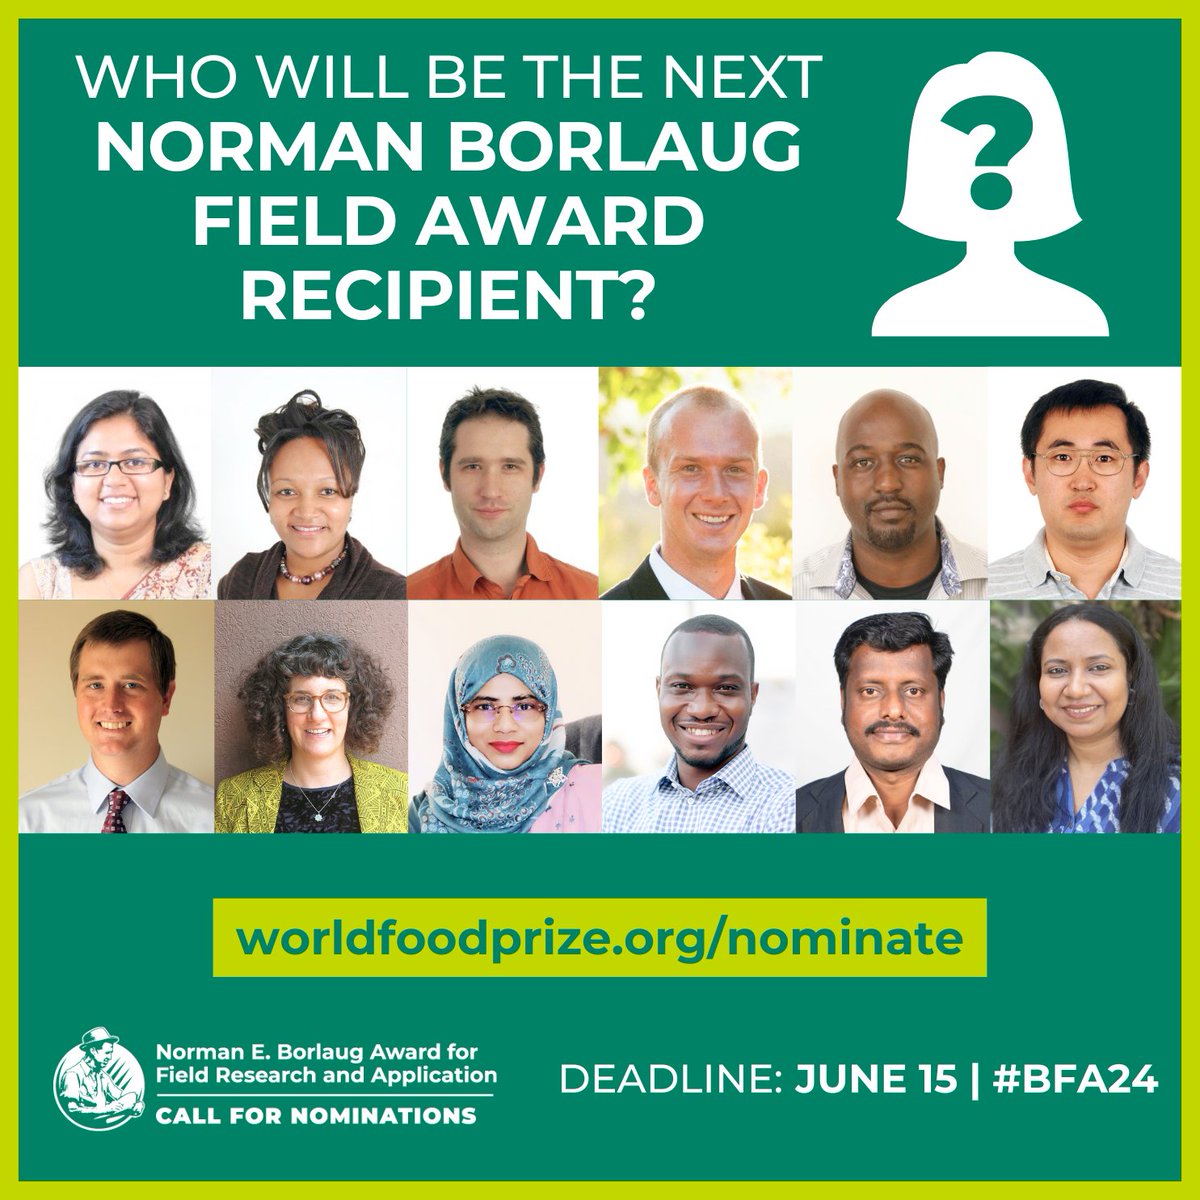 The Borlaug Field Award honors an individual working to advance food security alongside… 👩‍🌾Farmers 👨‍🌾Herders 🎣Fishers ...or others in the food production, processing and distribution chain. Learn more about the #BFA24 & nominate before June 15: 👉 bit.ly/3W5Spnf